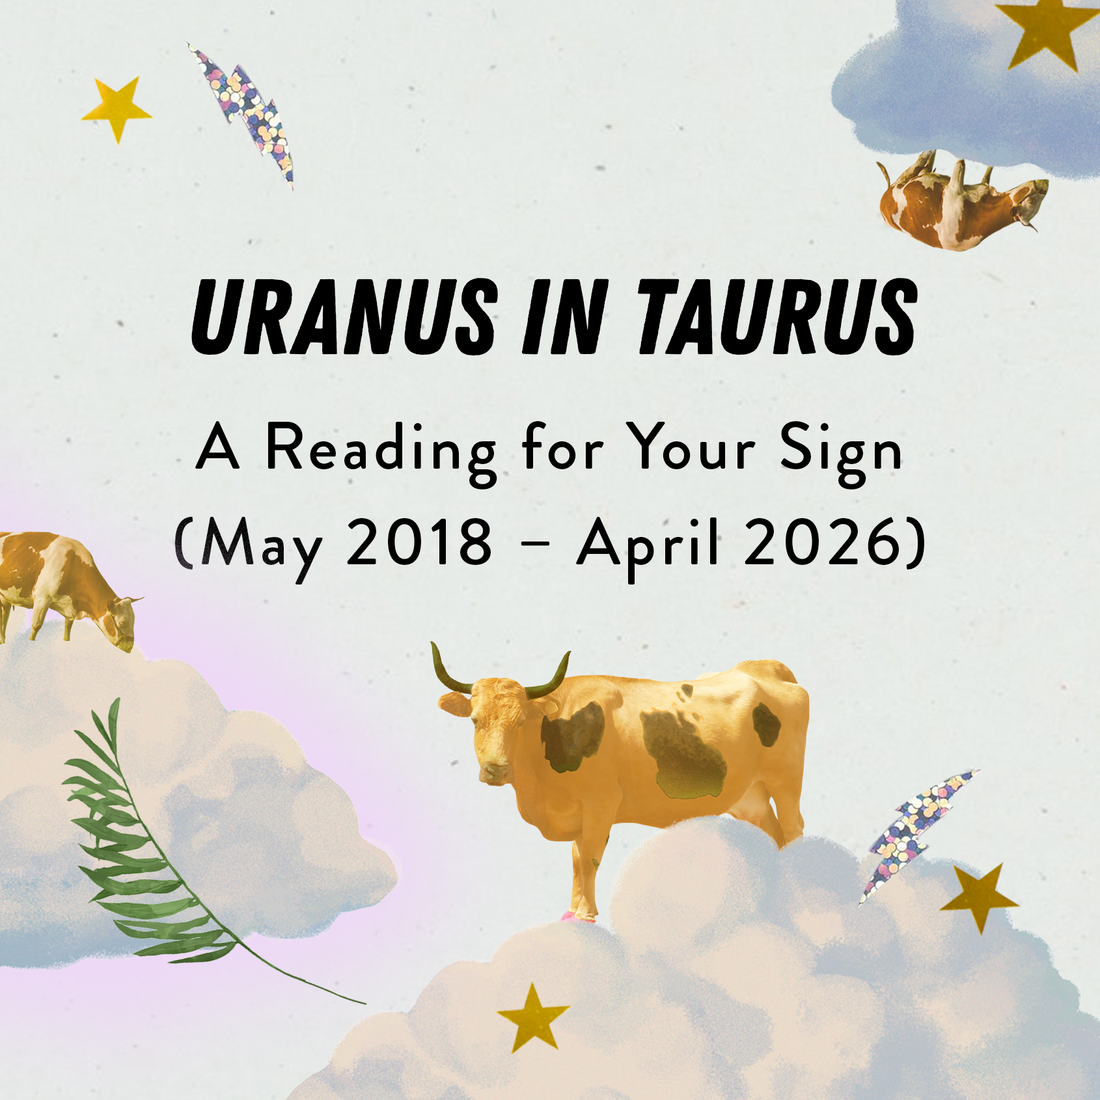 Uranus in Taurus: A Reading for Your Sign (May 2018 – April 2026)